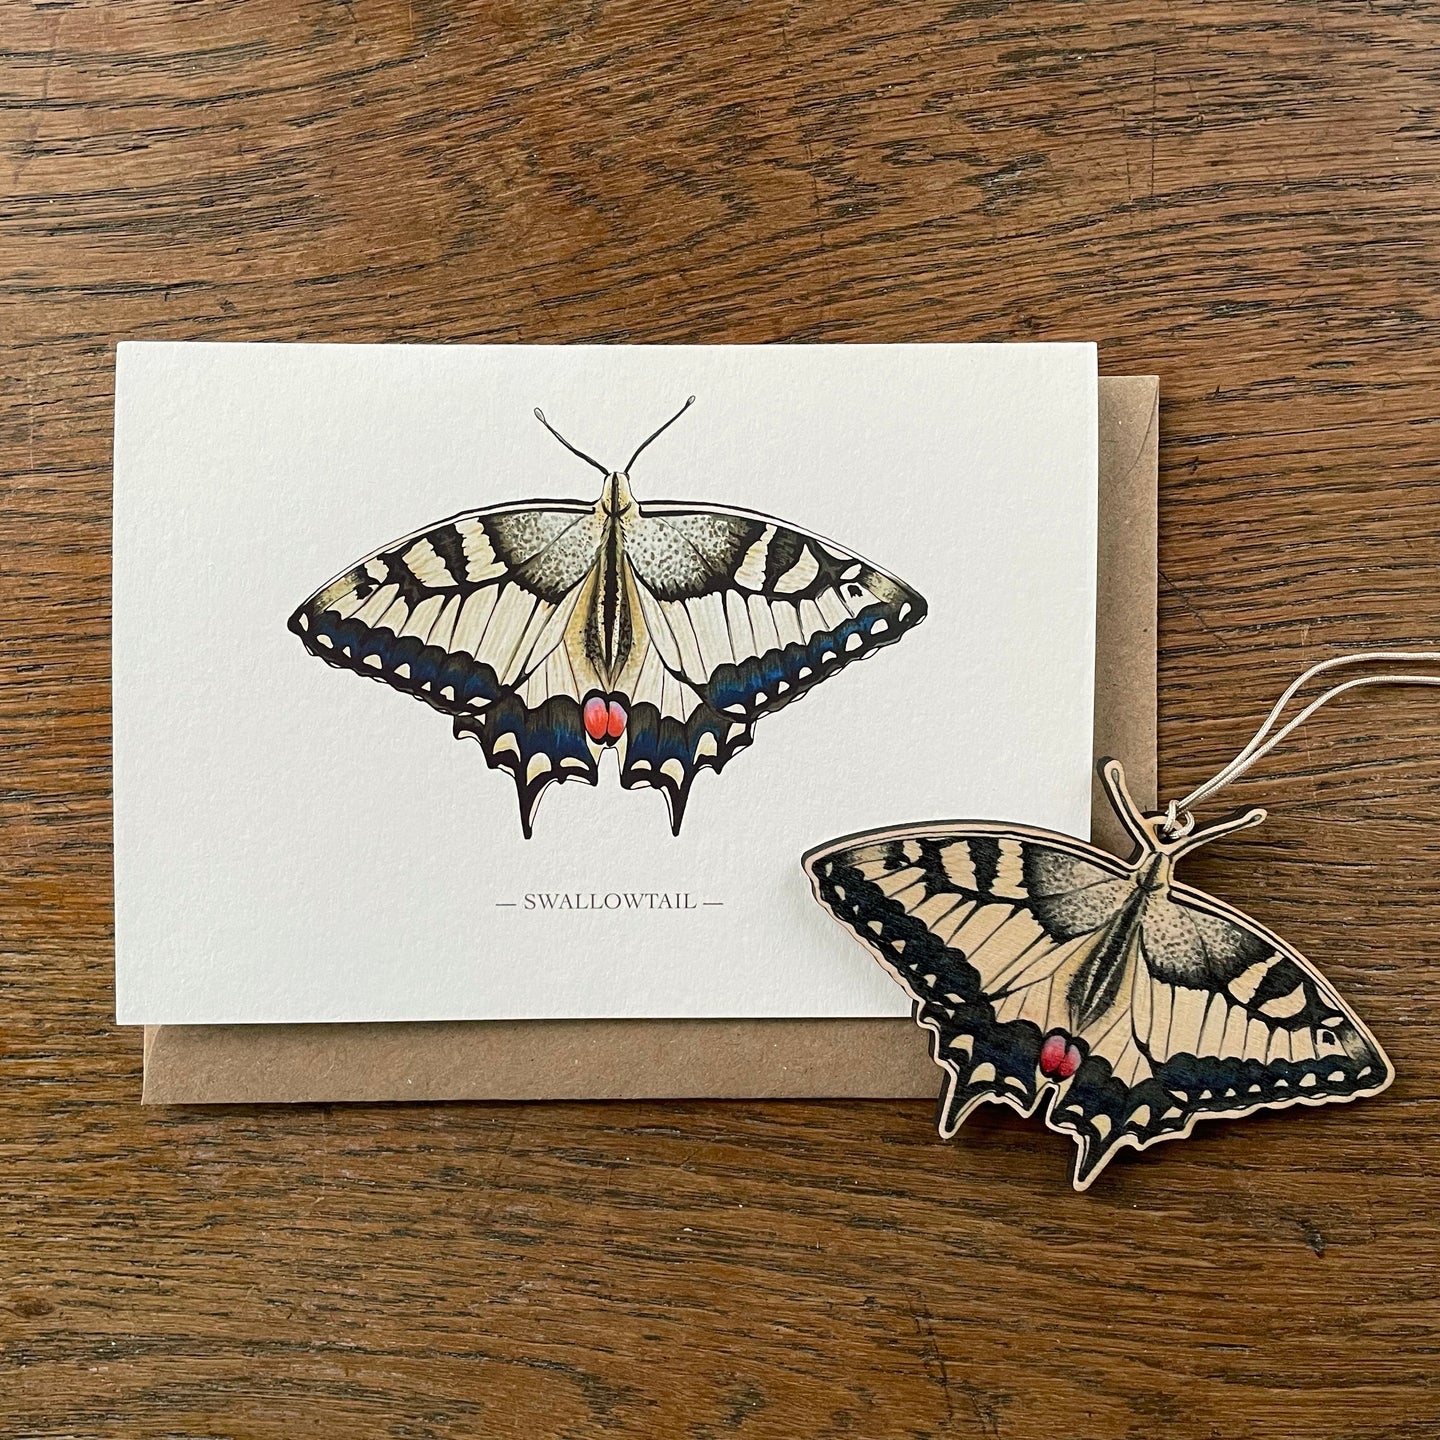 Swallowtail butterfly - Card with wooden decoration